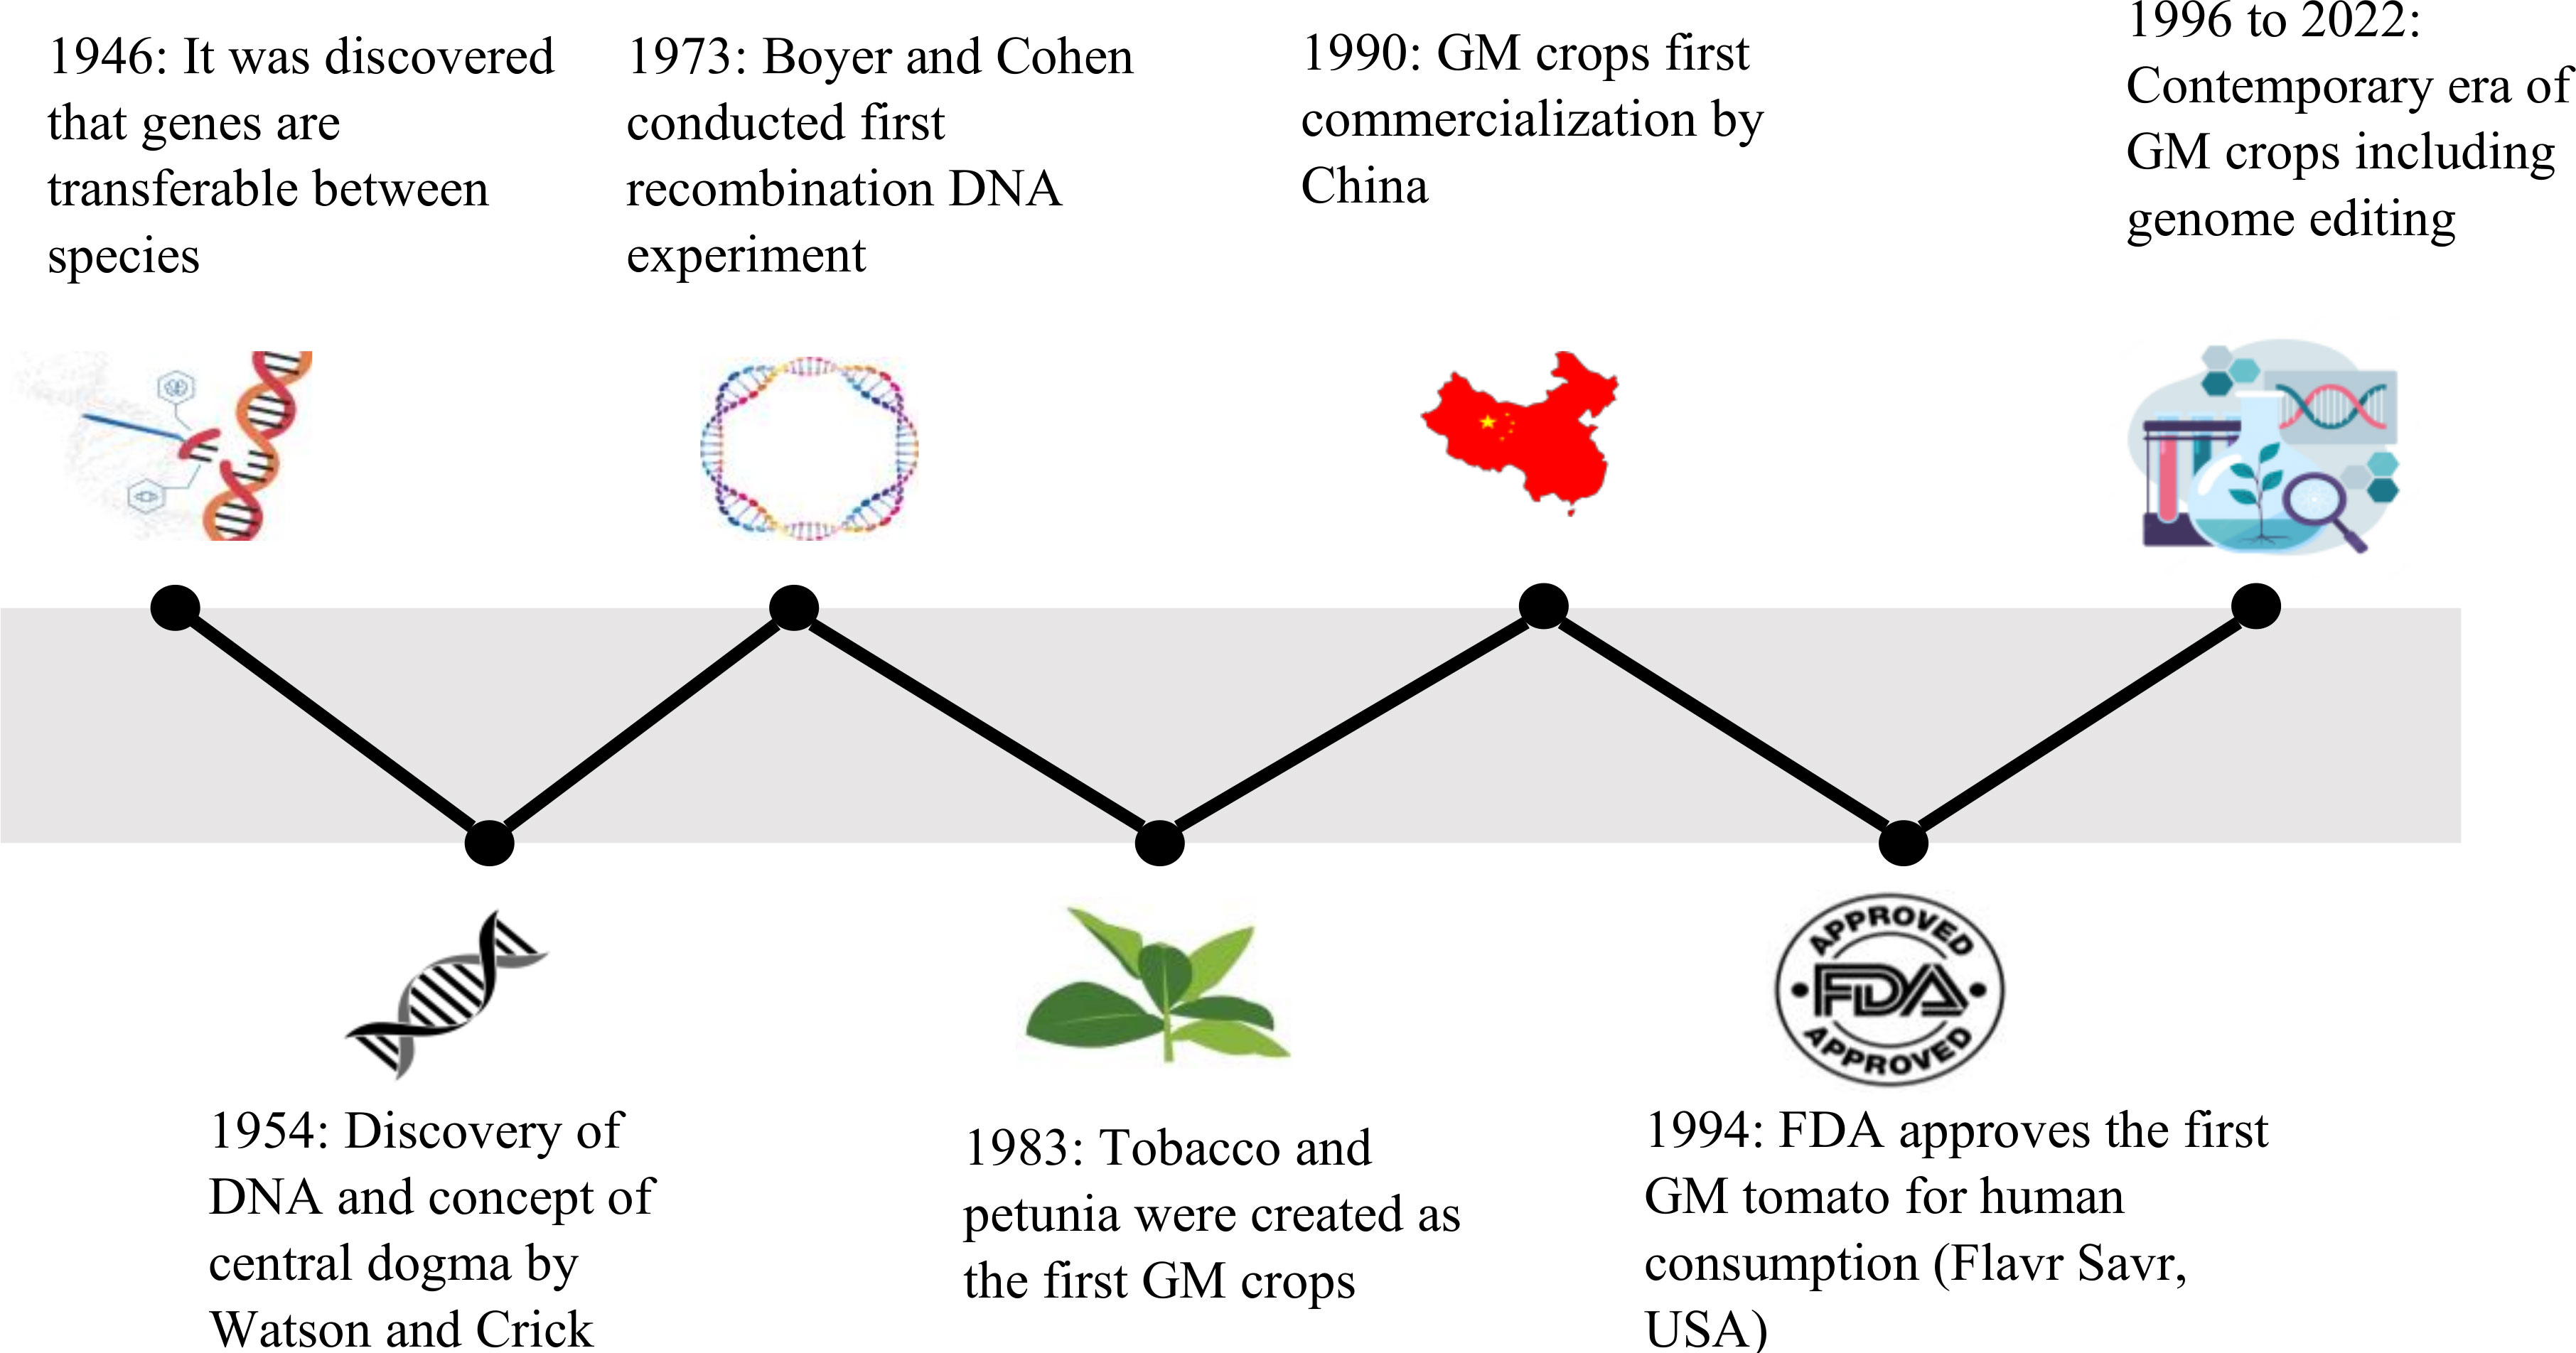 The development of GM crops aiding in the solution to world hunger.